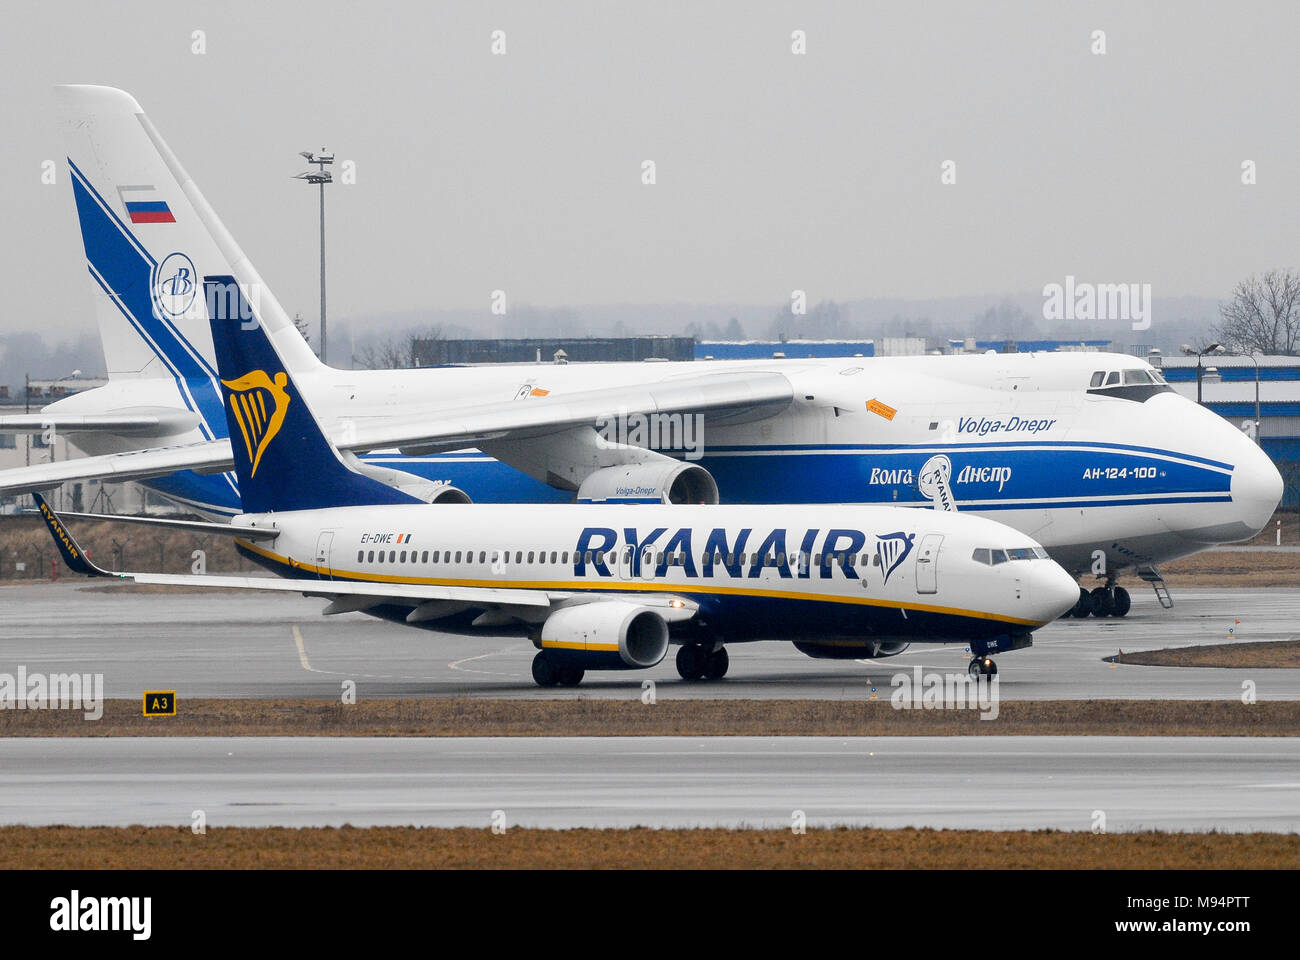 Gdansk, Poland. 22nd Mar, 2018. Russian strategic airlift jet aircraft Antonov An-124-100 Ruslan owned by Volga-Dnepr Airlines and low cost airline Ryanair aircraft Boeing 737-800 in Gdansk Lech Walesa Airport in Gdansk, Poland. March 22nd 2018 © Wojciech Strozyk / Alamy Live News Stock Photo